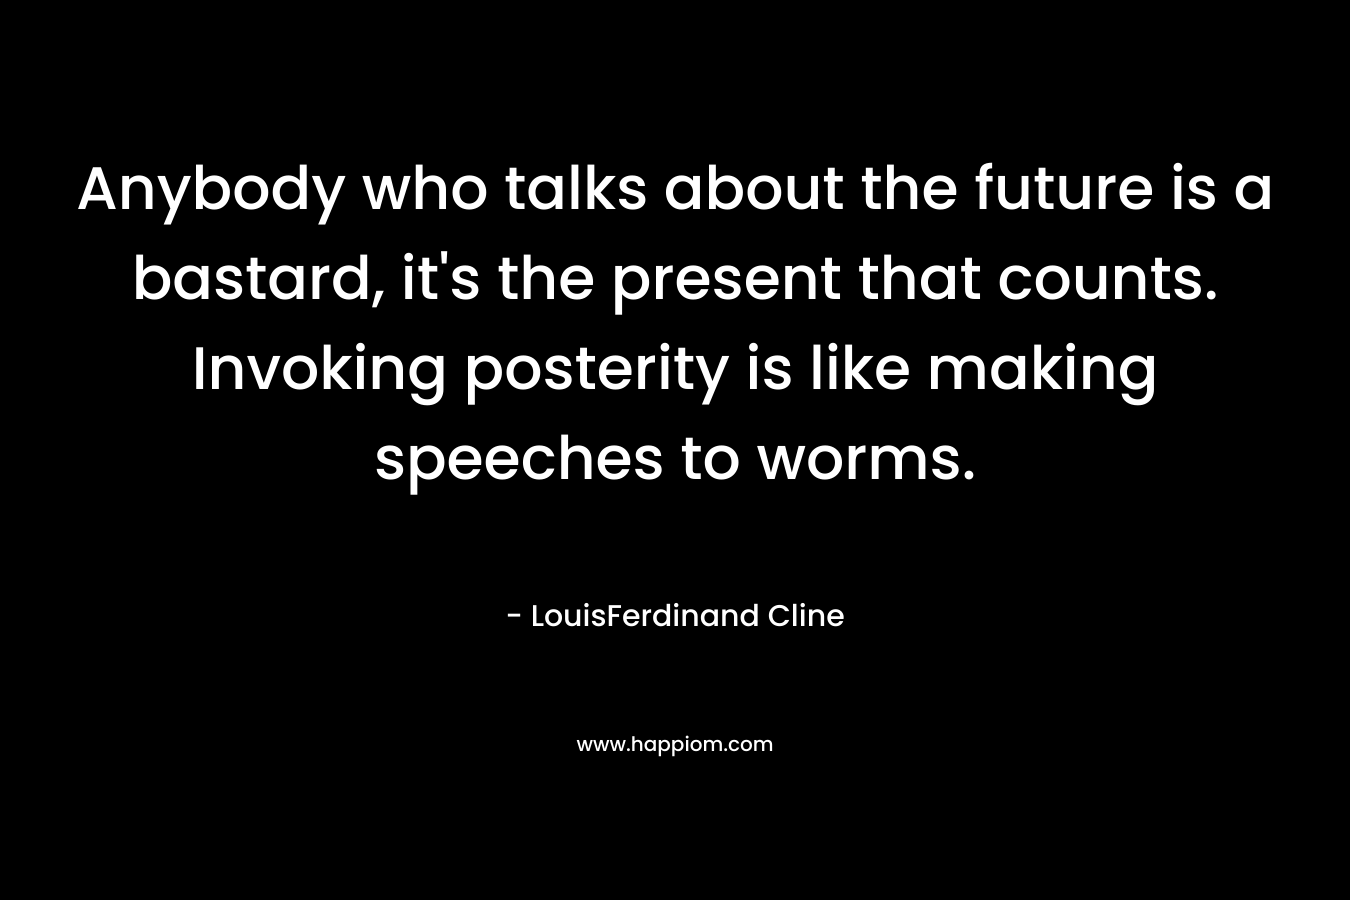 Anybody who talks about the future is a bastard, it’s the present that counts. Invoking posterity is like making speeches to worms. – LouisFerdinand Cline